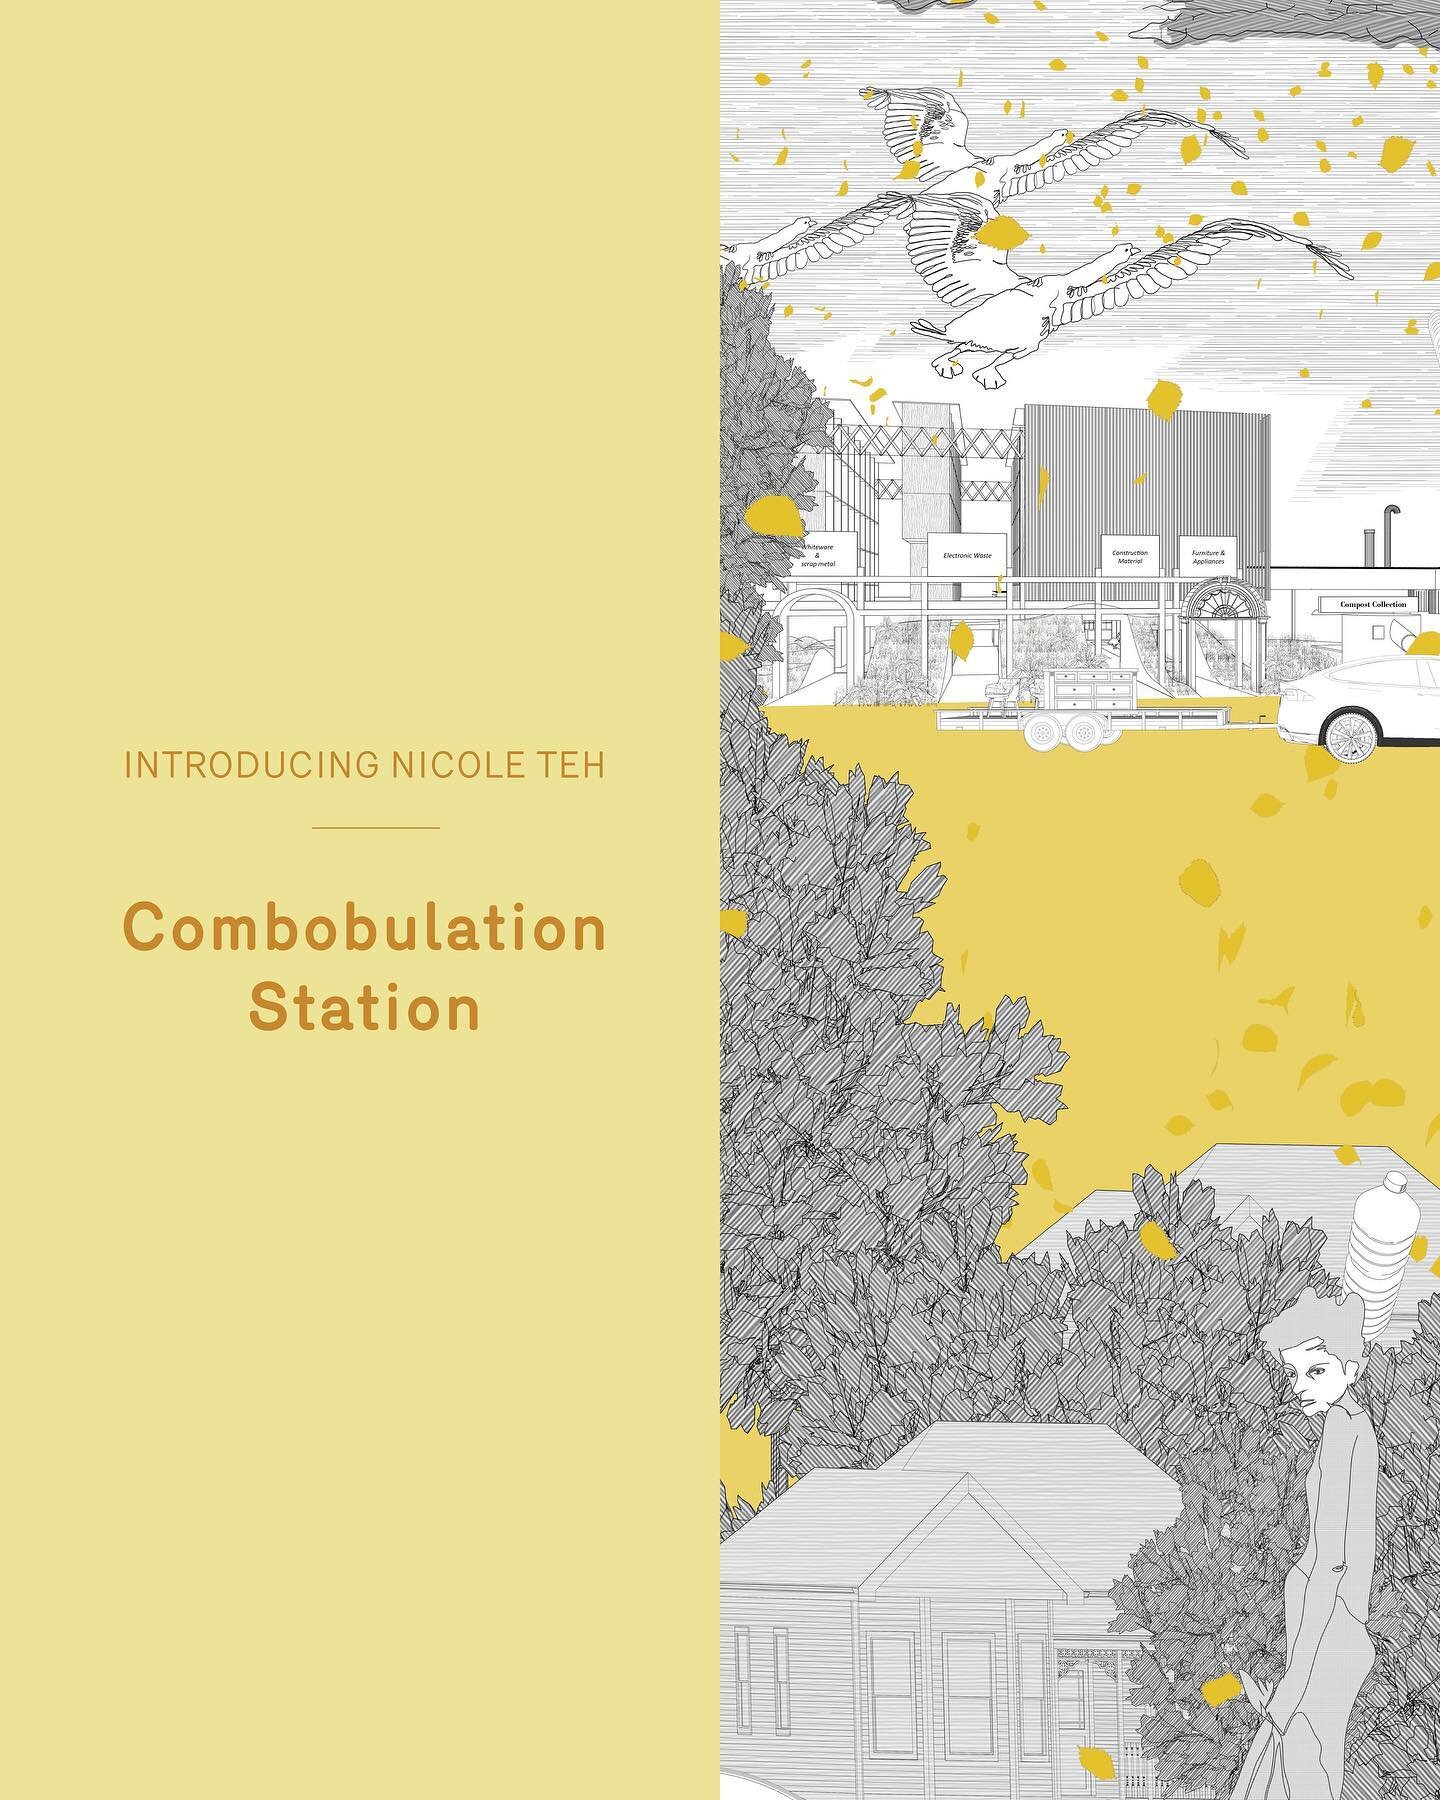 Introducing Nicole Teh.
We asked Nicole to share some images from her thesis project Combobulation Station: Uncanny Architecture for Uncommon Objects.

Combobulation Station emerged from a reaction to the feelings of discombobulation and dysphoria ab